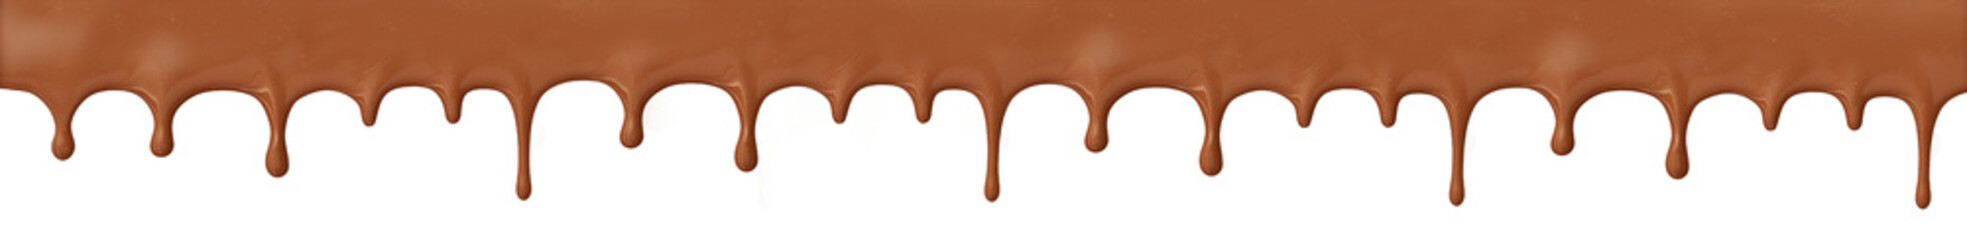 Melted chocolate in 3d render